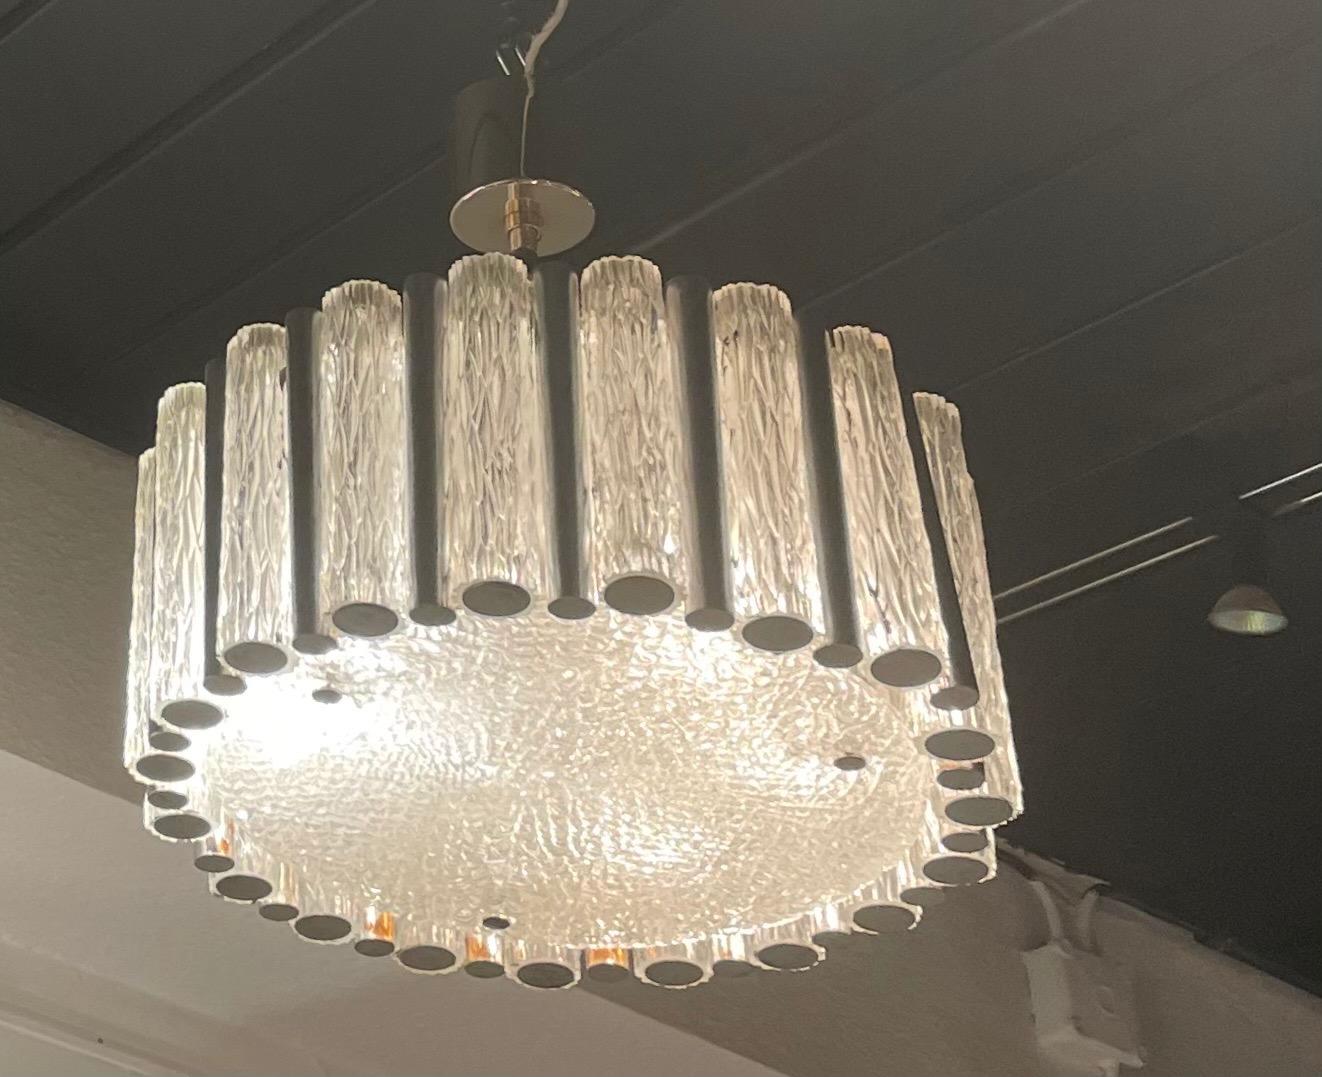 Stunning german chandelier by Doria Lunchten- Germany
No piece missing.
Murano glass and aluminum tubes.